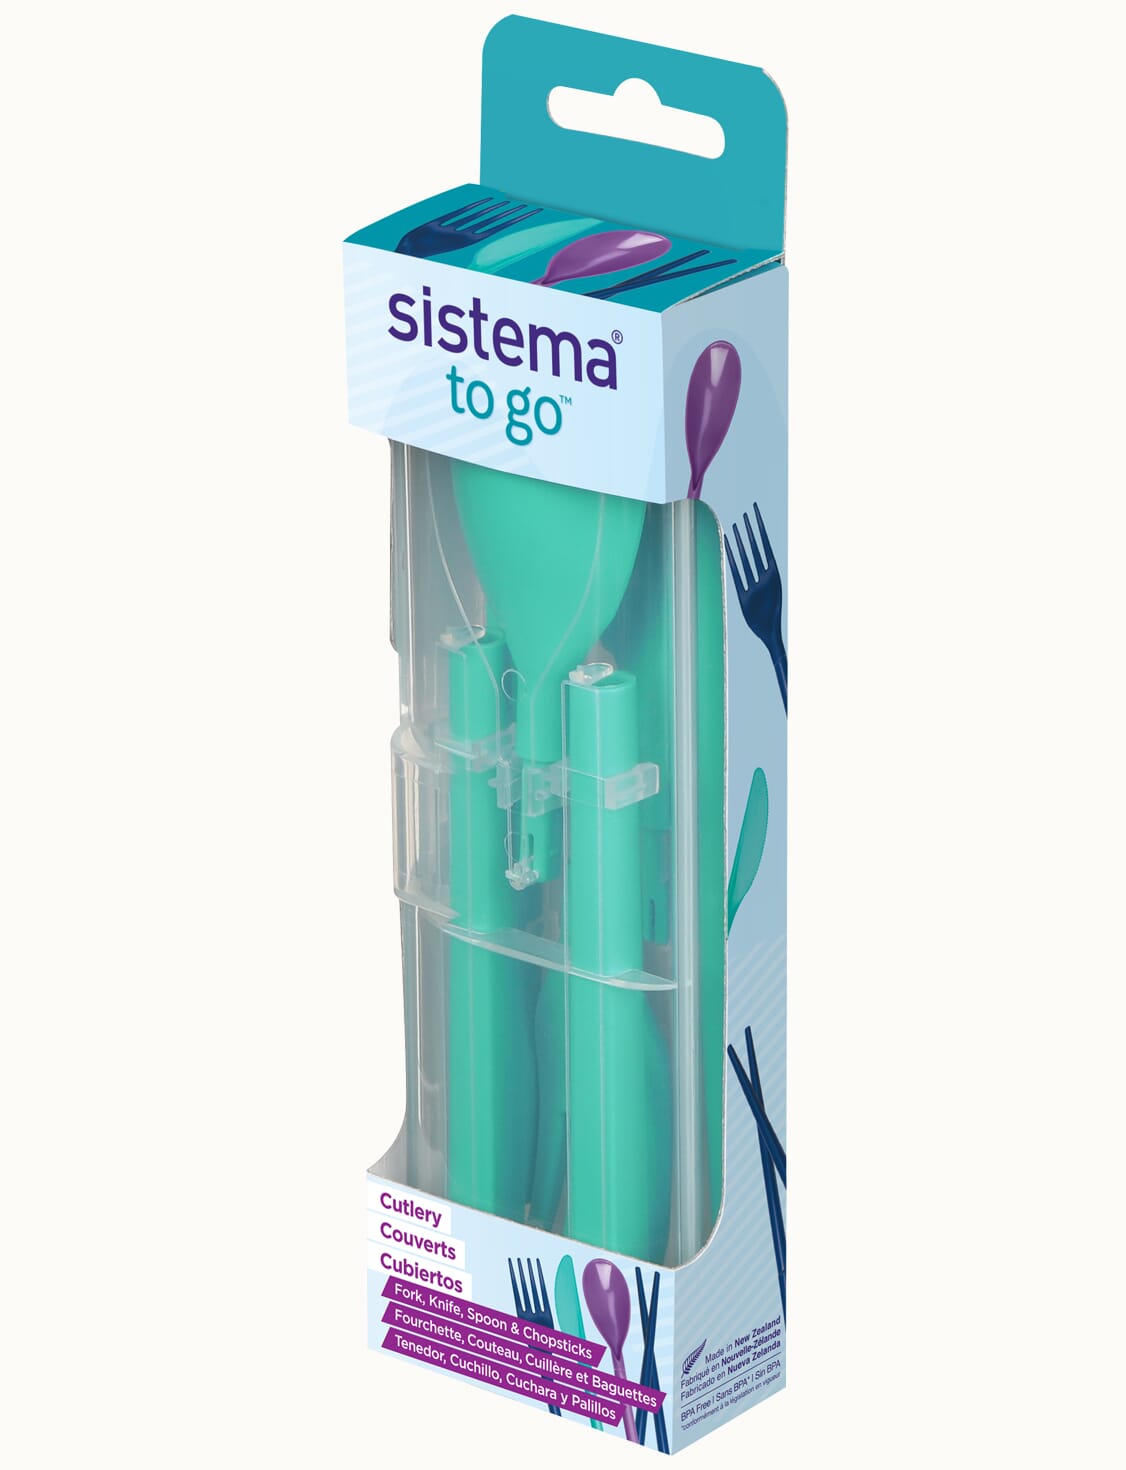 https://stergita.sirv.com/sistema/catalog/product/1/9/1917-53c-01_cutlery_togo_angle_trilingual_mintyteal.png?canvas.color=fcfbf8